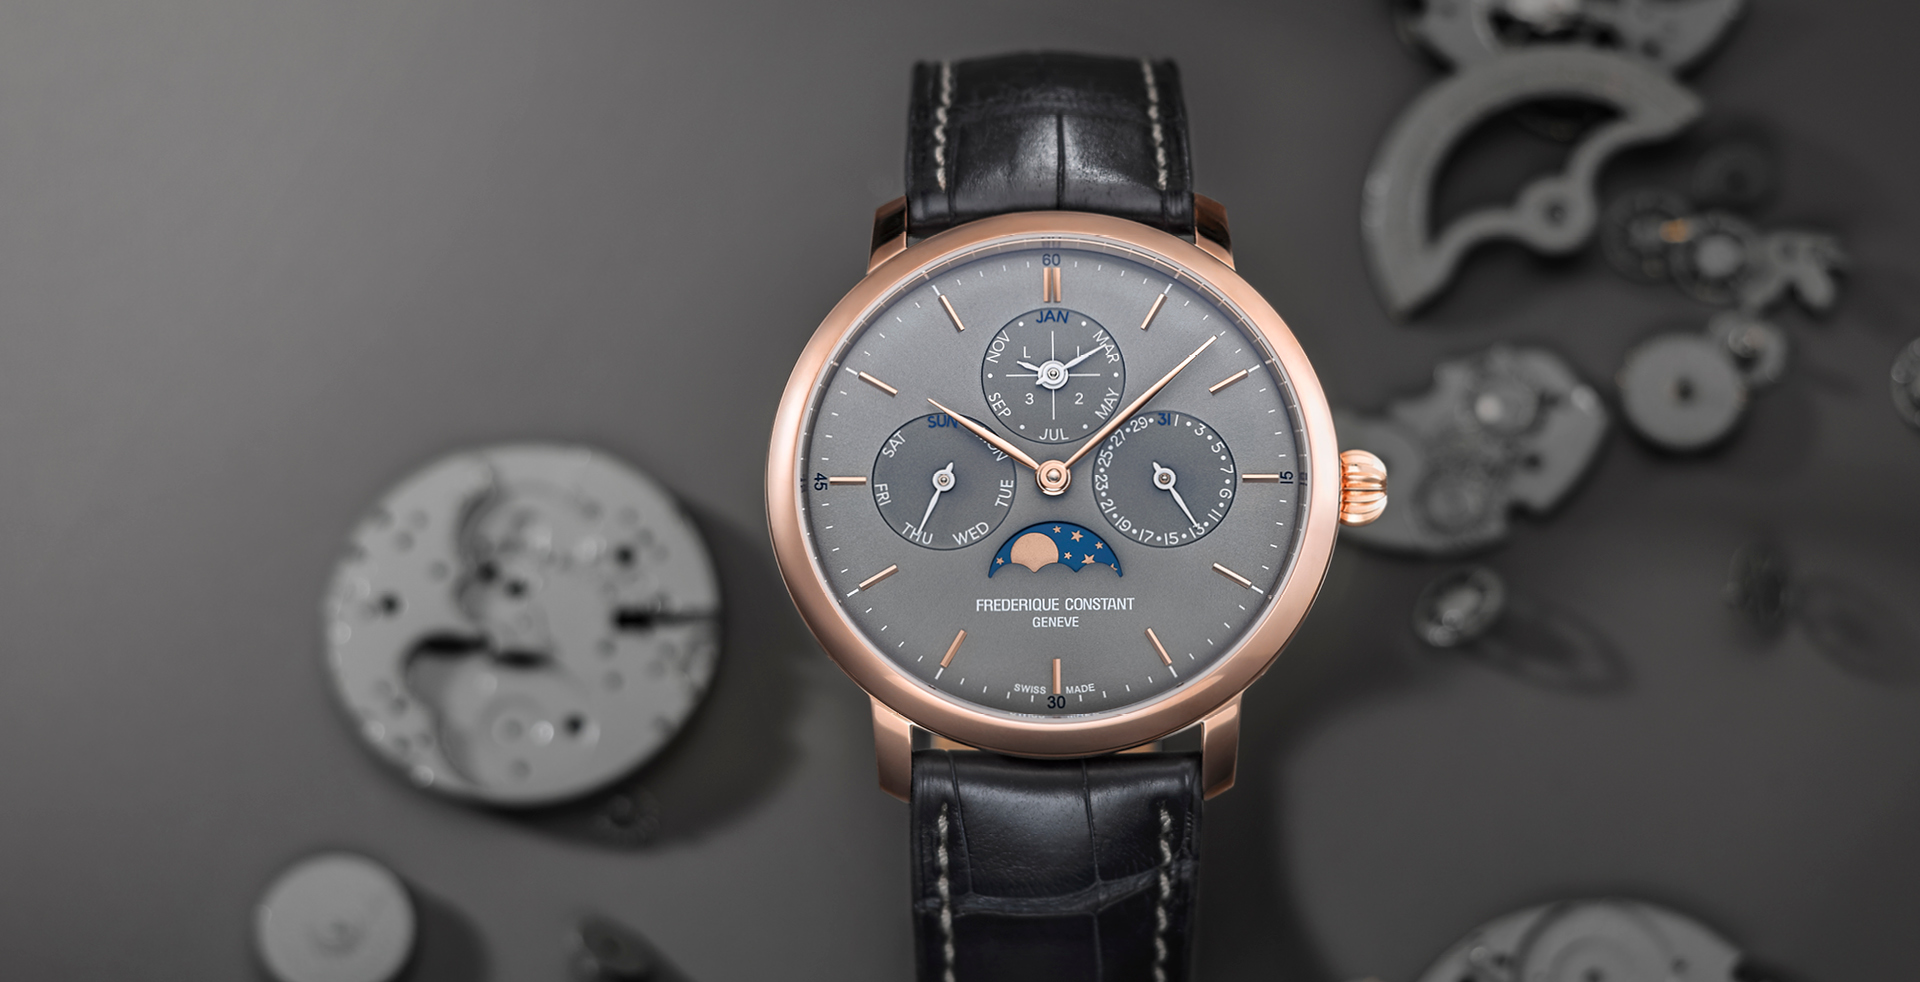 Slimline PerpetSlimline Perpetual Calendar Manufacture watch for man.   Automatic movement, grey dial, rose-gold plated case, date, day and month counters, moonphase and blue leather strapual Calendar Manufacture watch for man.   Automatic movement, grey dial, stainless-steel case, date, day and month counters, moonphase and blue leather strap 